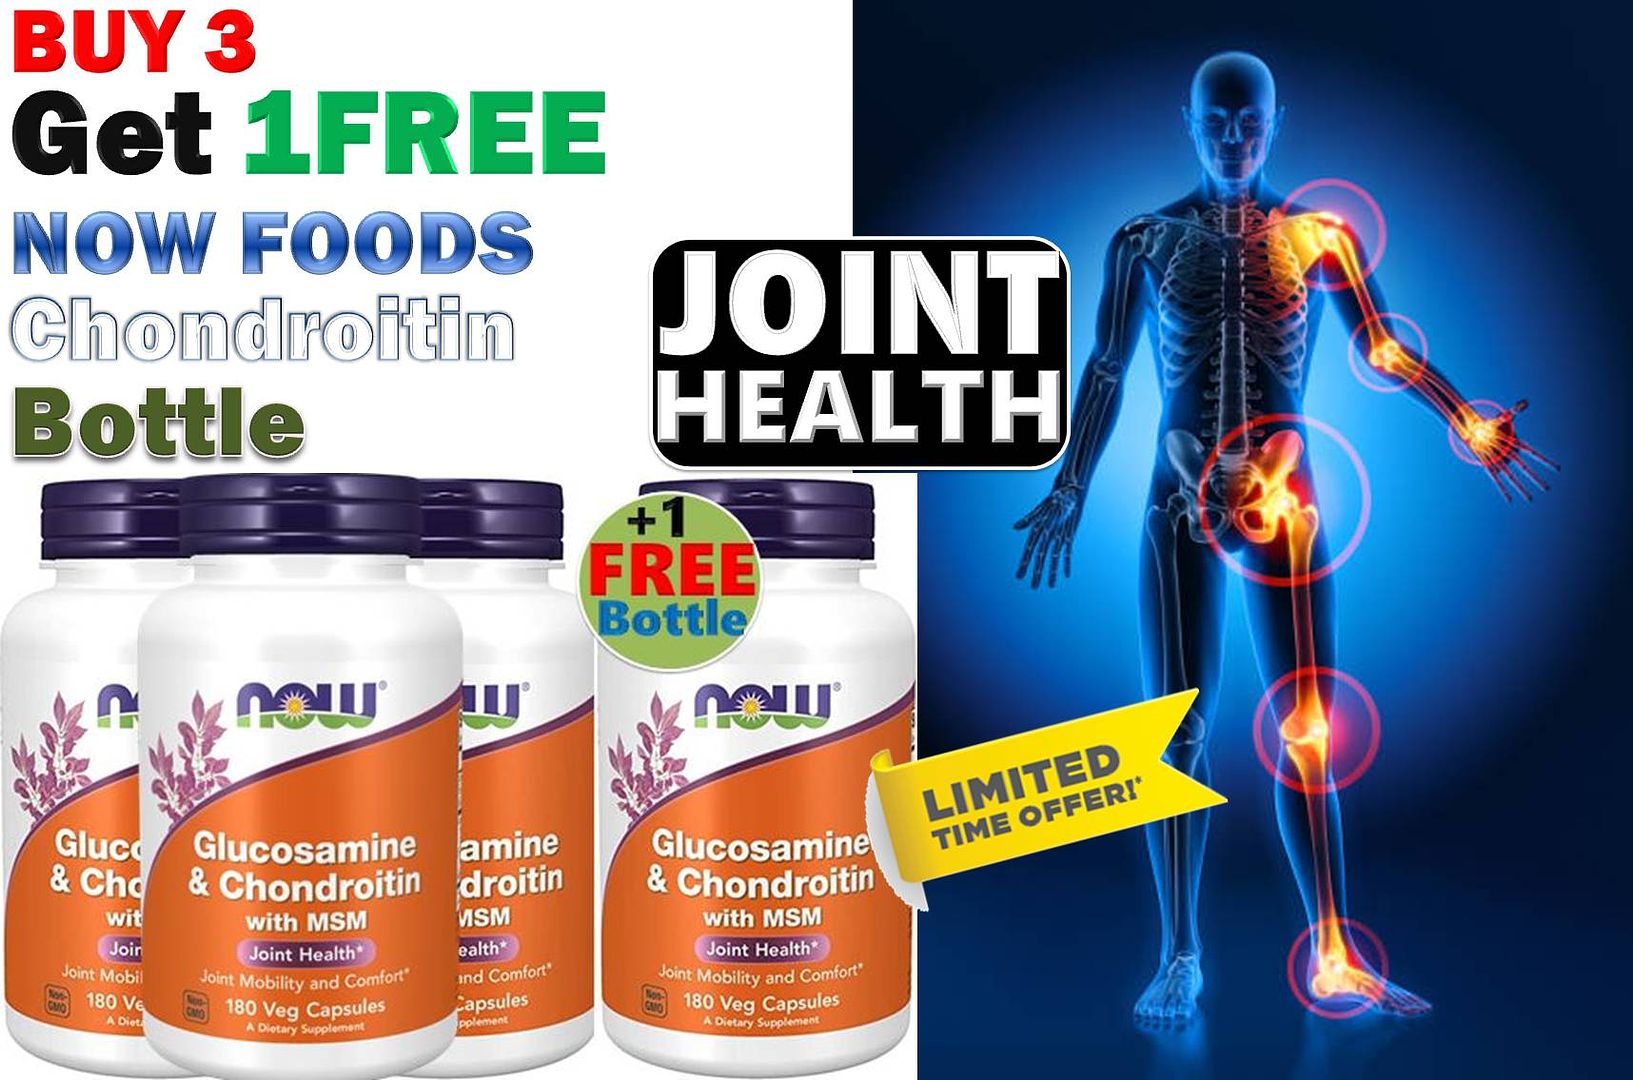 Joint Health Now Chondroitin